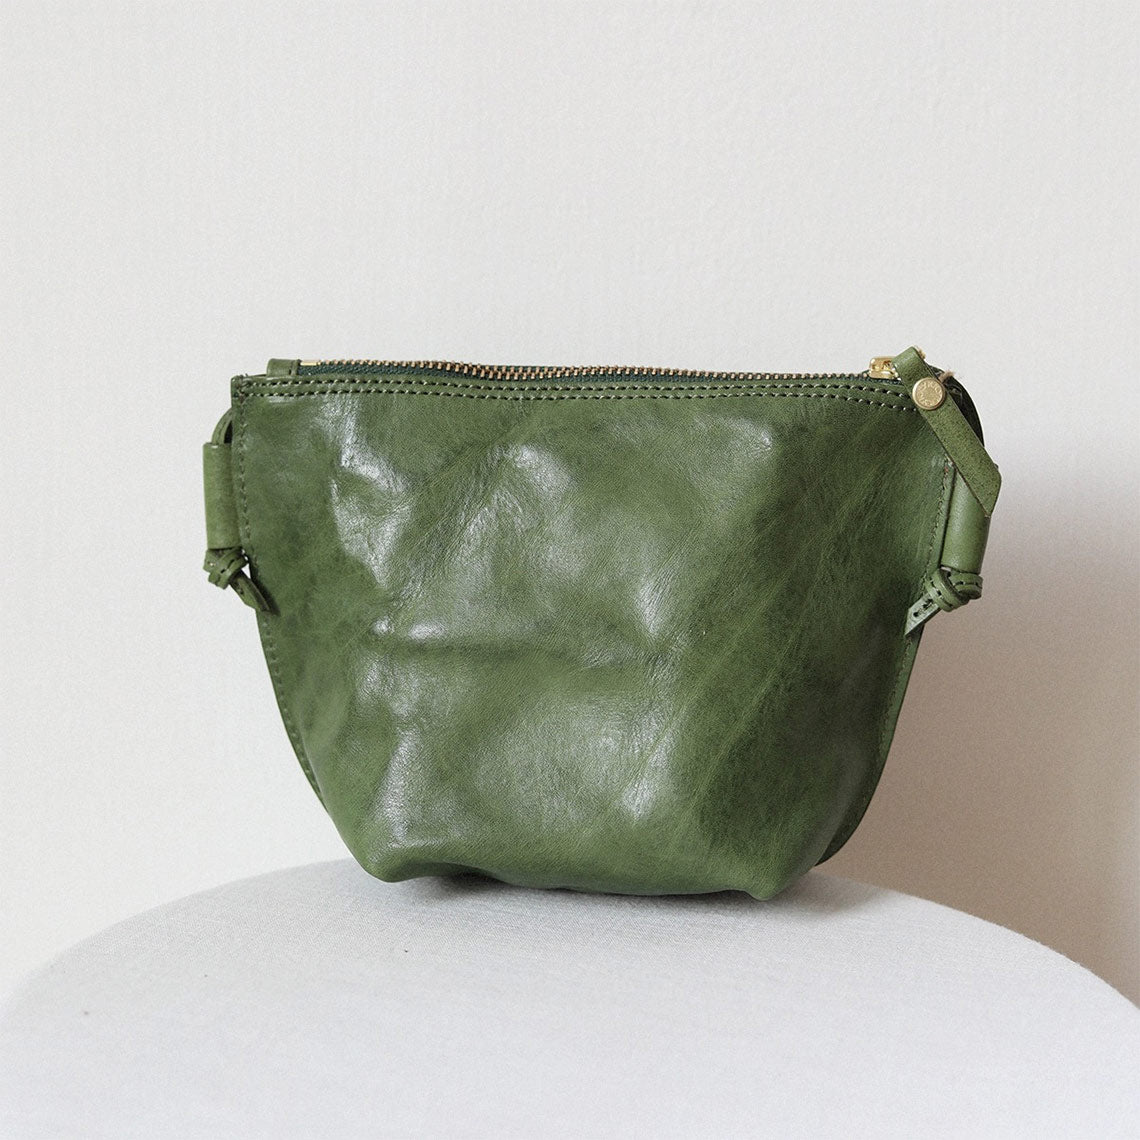 Green Leather Bag in Small Size